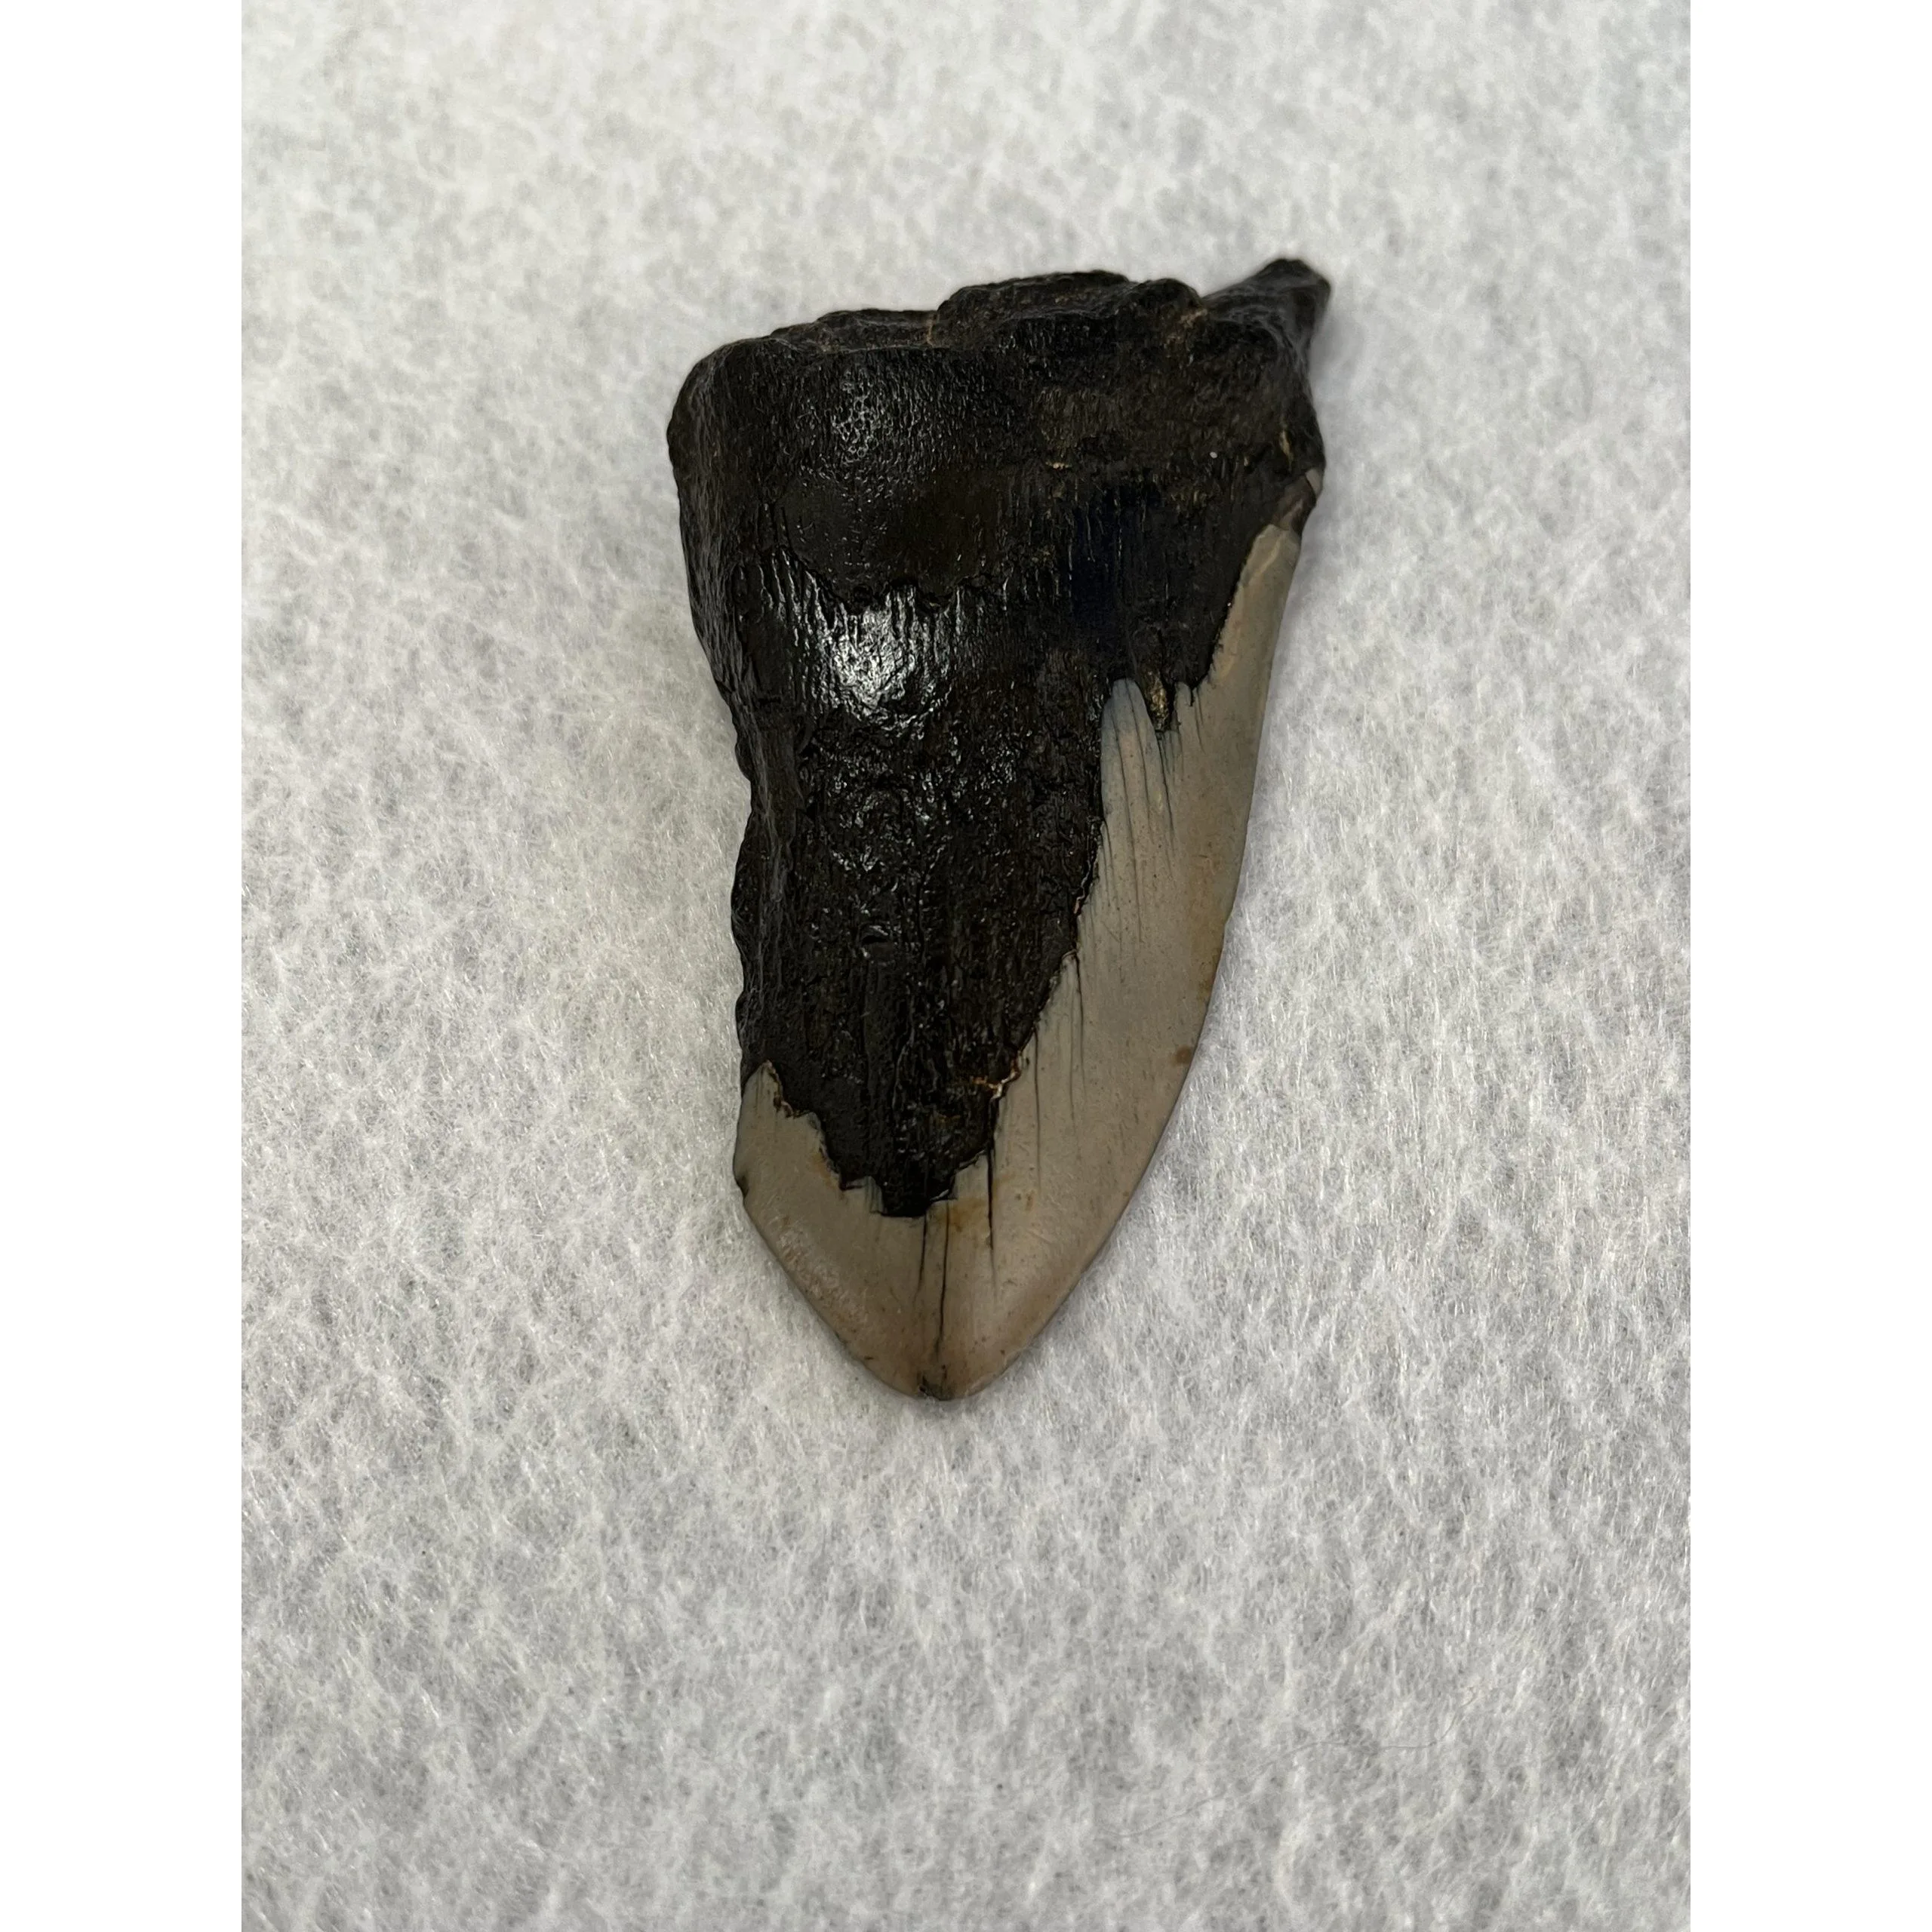 Megalodon Partial Tooth, South Carolina, 4.27 inch Prehistoric Online